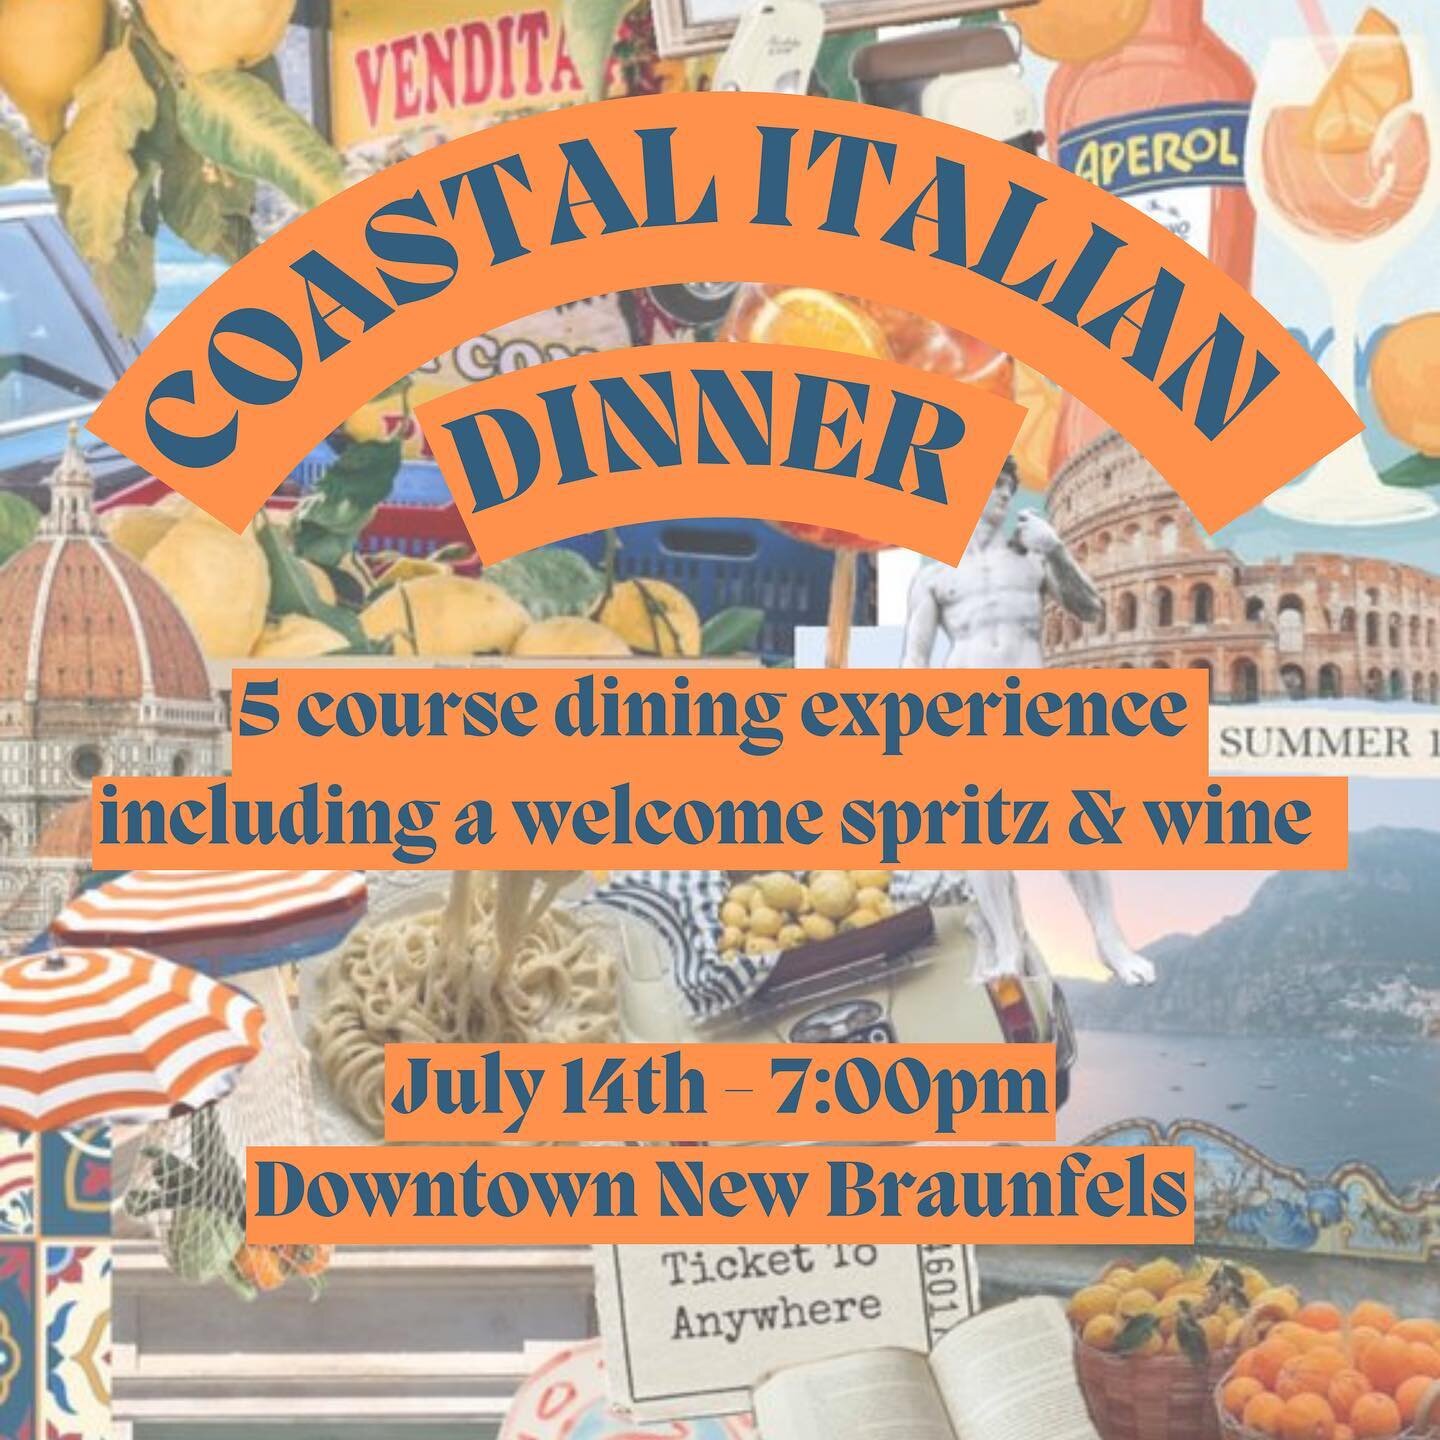 Join us for a coastal Italian dinner without having to travel it Italy! @kelynegbuka with Buka Bakehouse will prepare a multi-course coastal Italian dinner accompanied with a welcome spritz and wine!!

This limited ticketed event at the beautiful @so